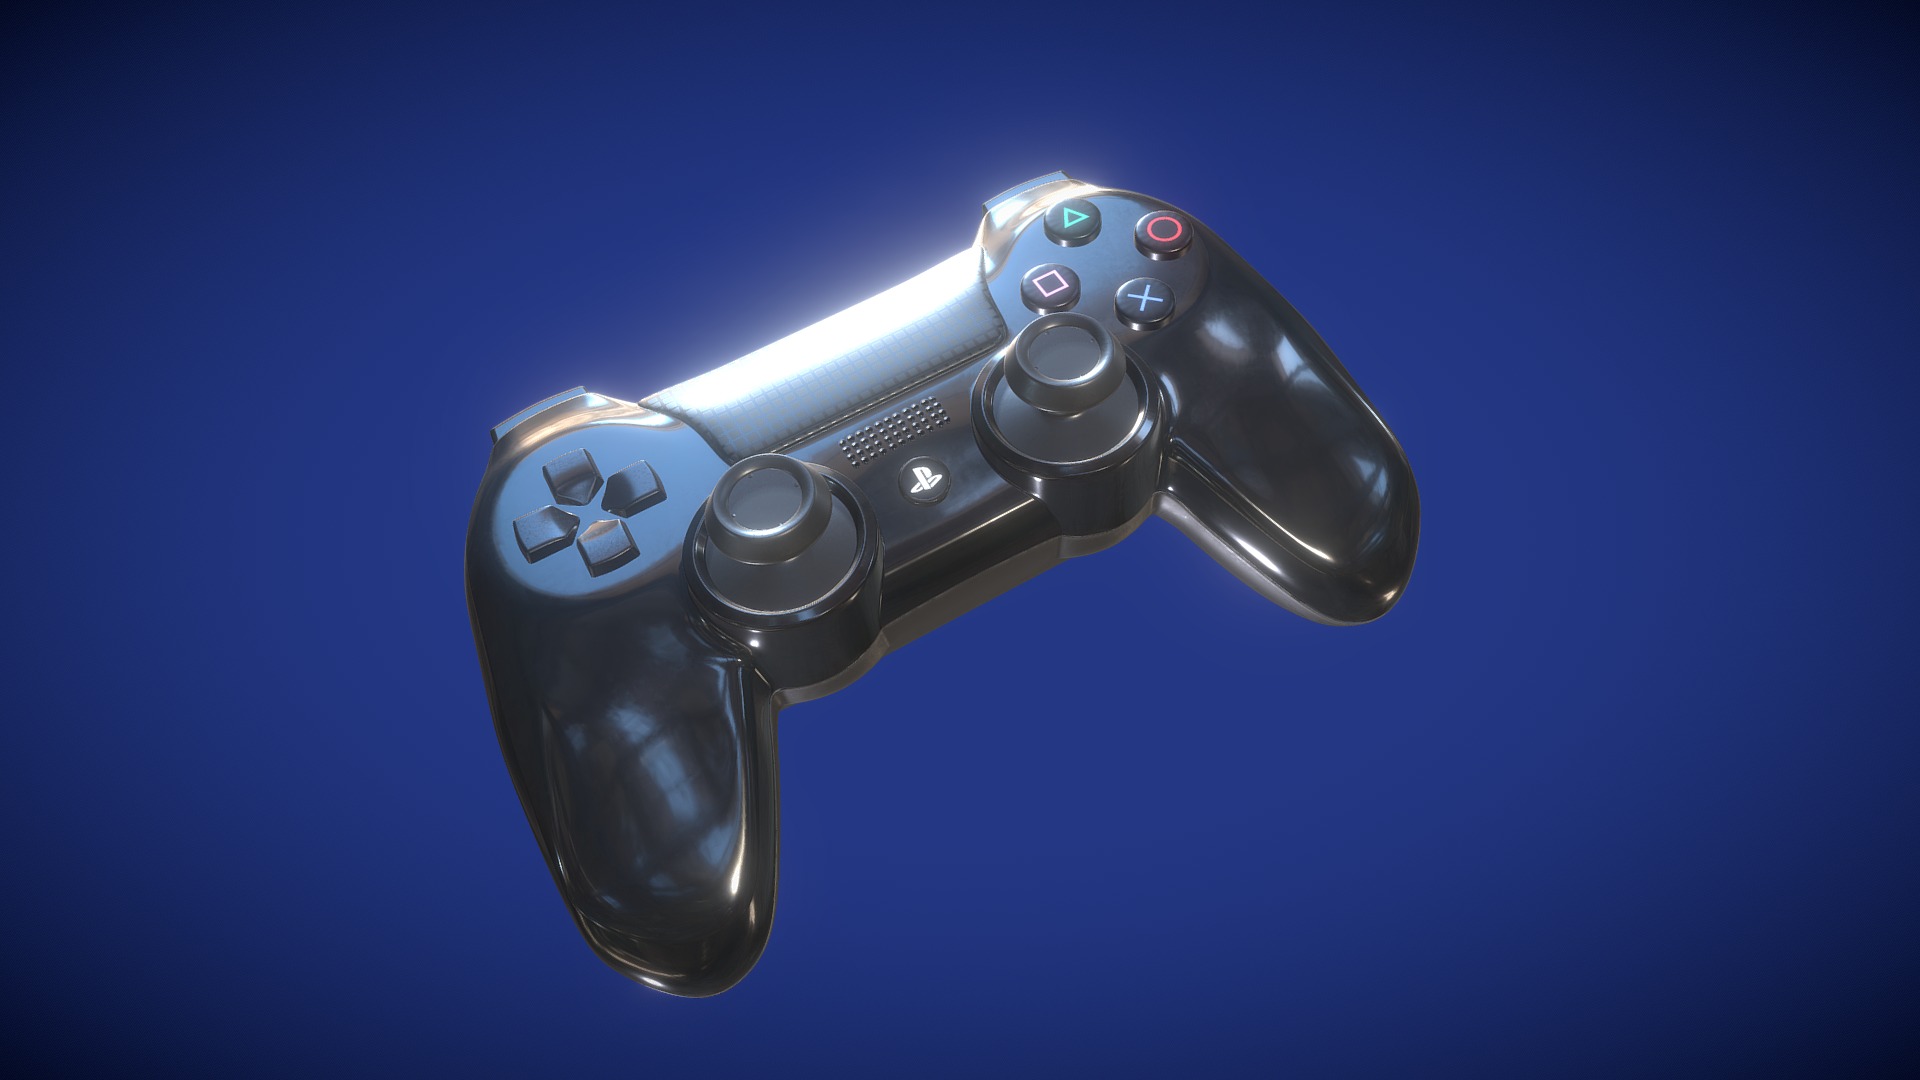 3D model Sony Playstation Dualshock Controller - This is a 3D model of the Sony Playstation Dualshock Controller. The 3D model is about a metal object with a light on it.